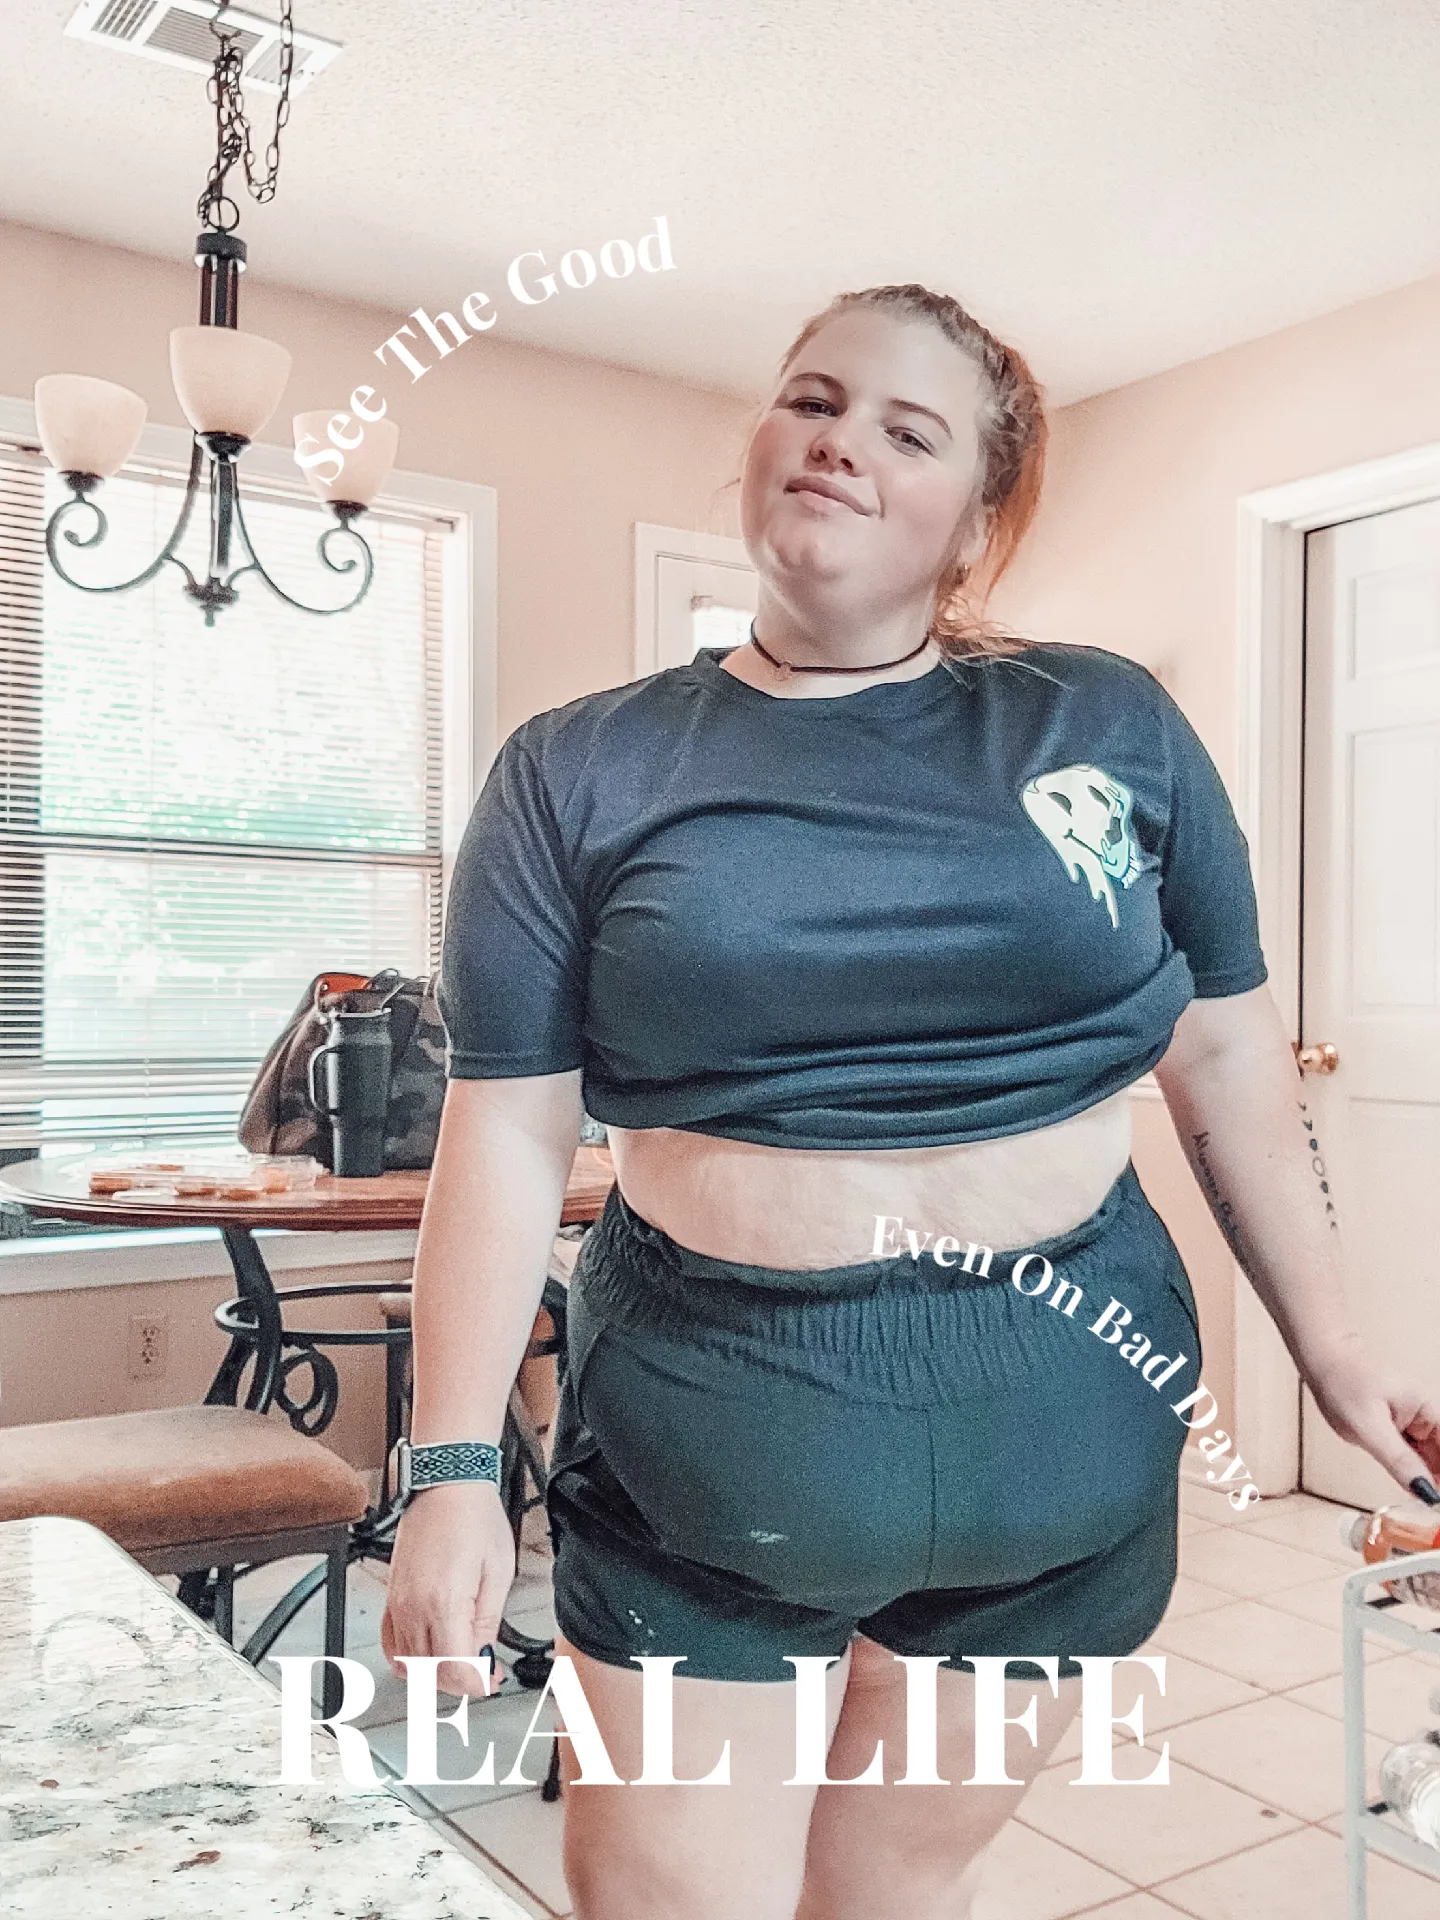 I'm fat, proud & WON'T hide my FUPA - if people don't want to get